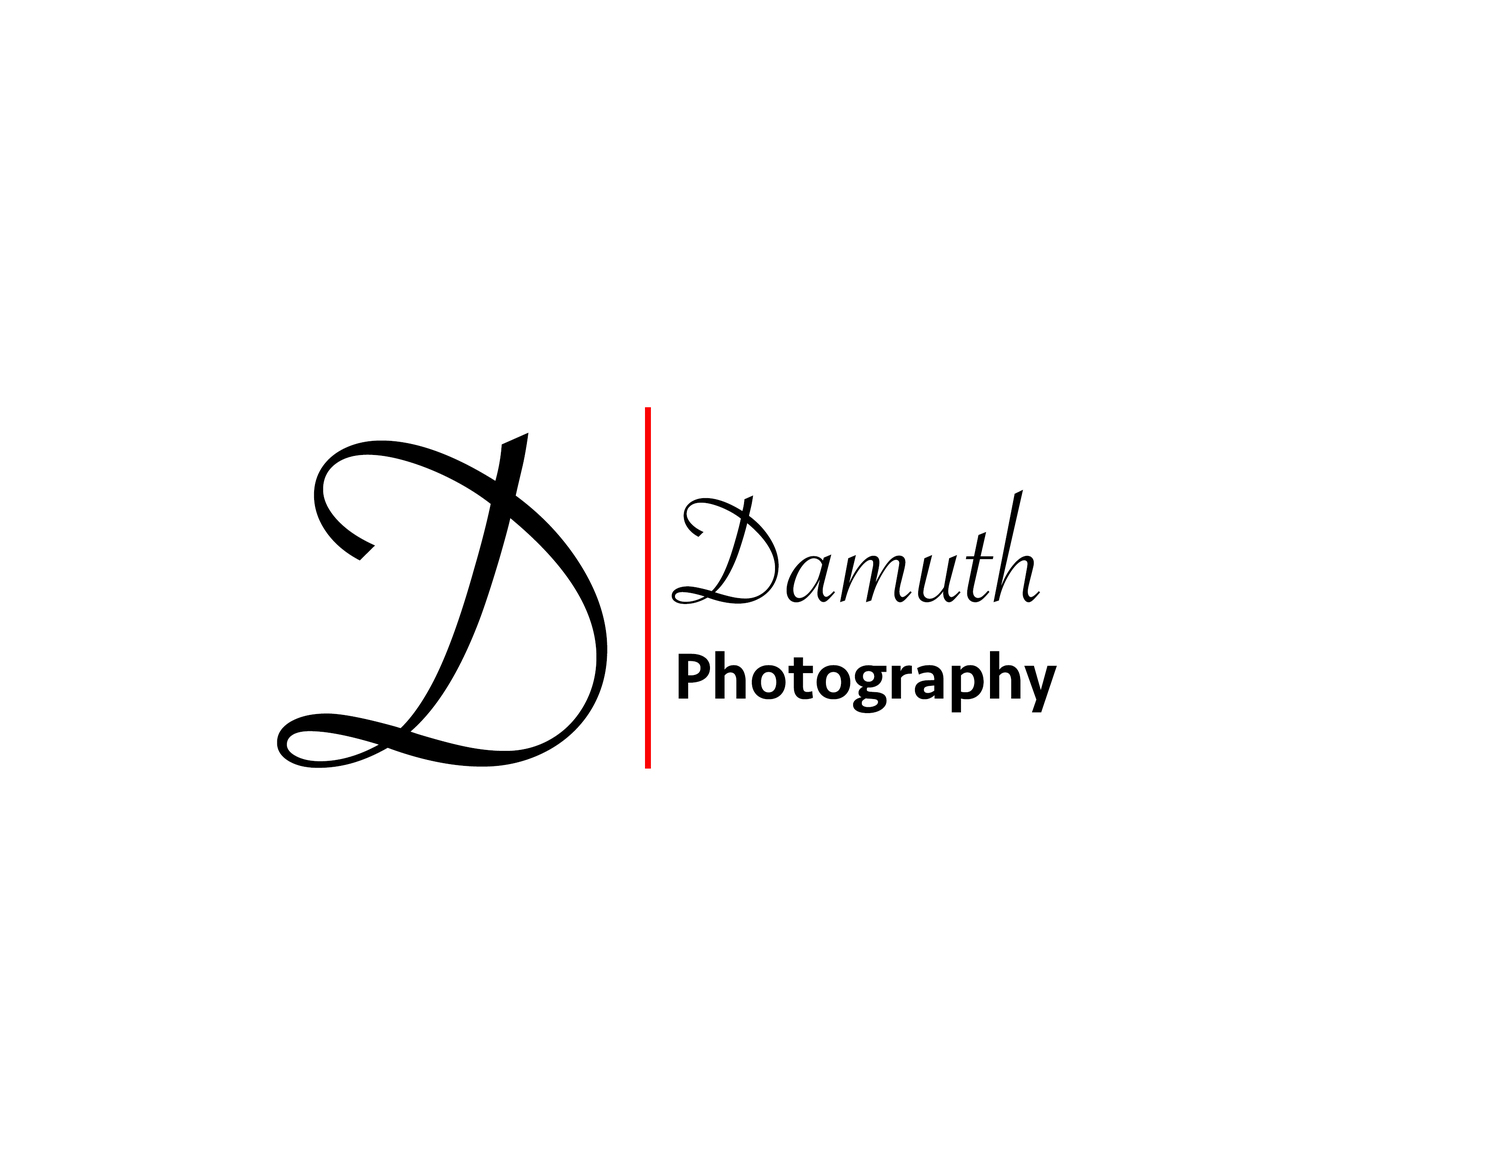 Damuth Photography